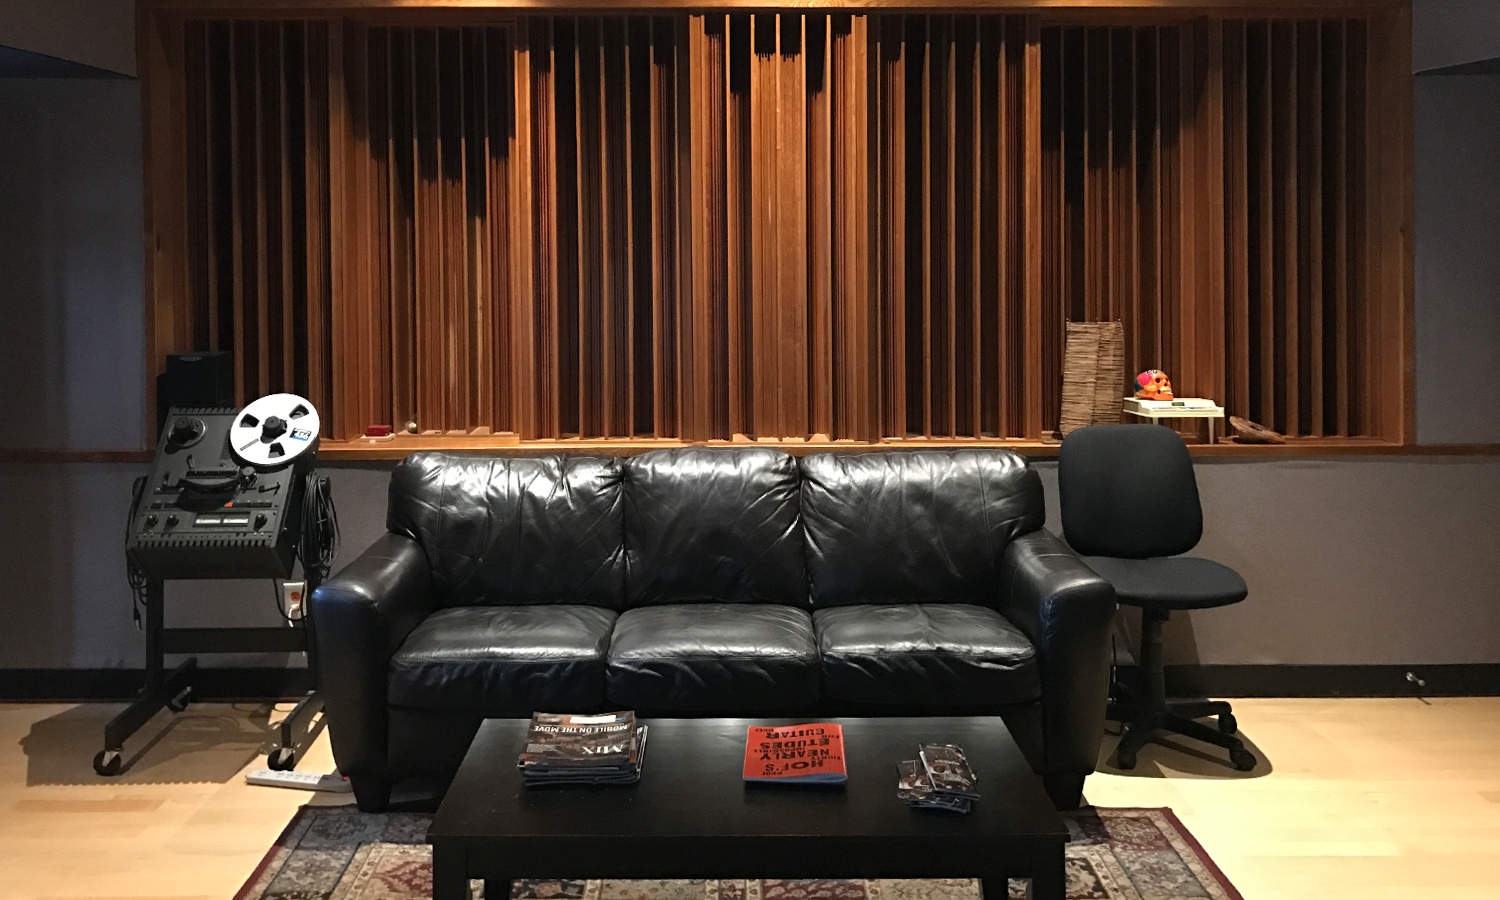 Control room diffusers with mandatory black leather couch